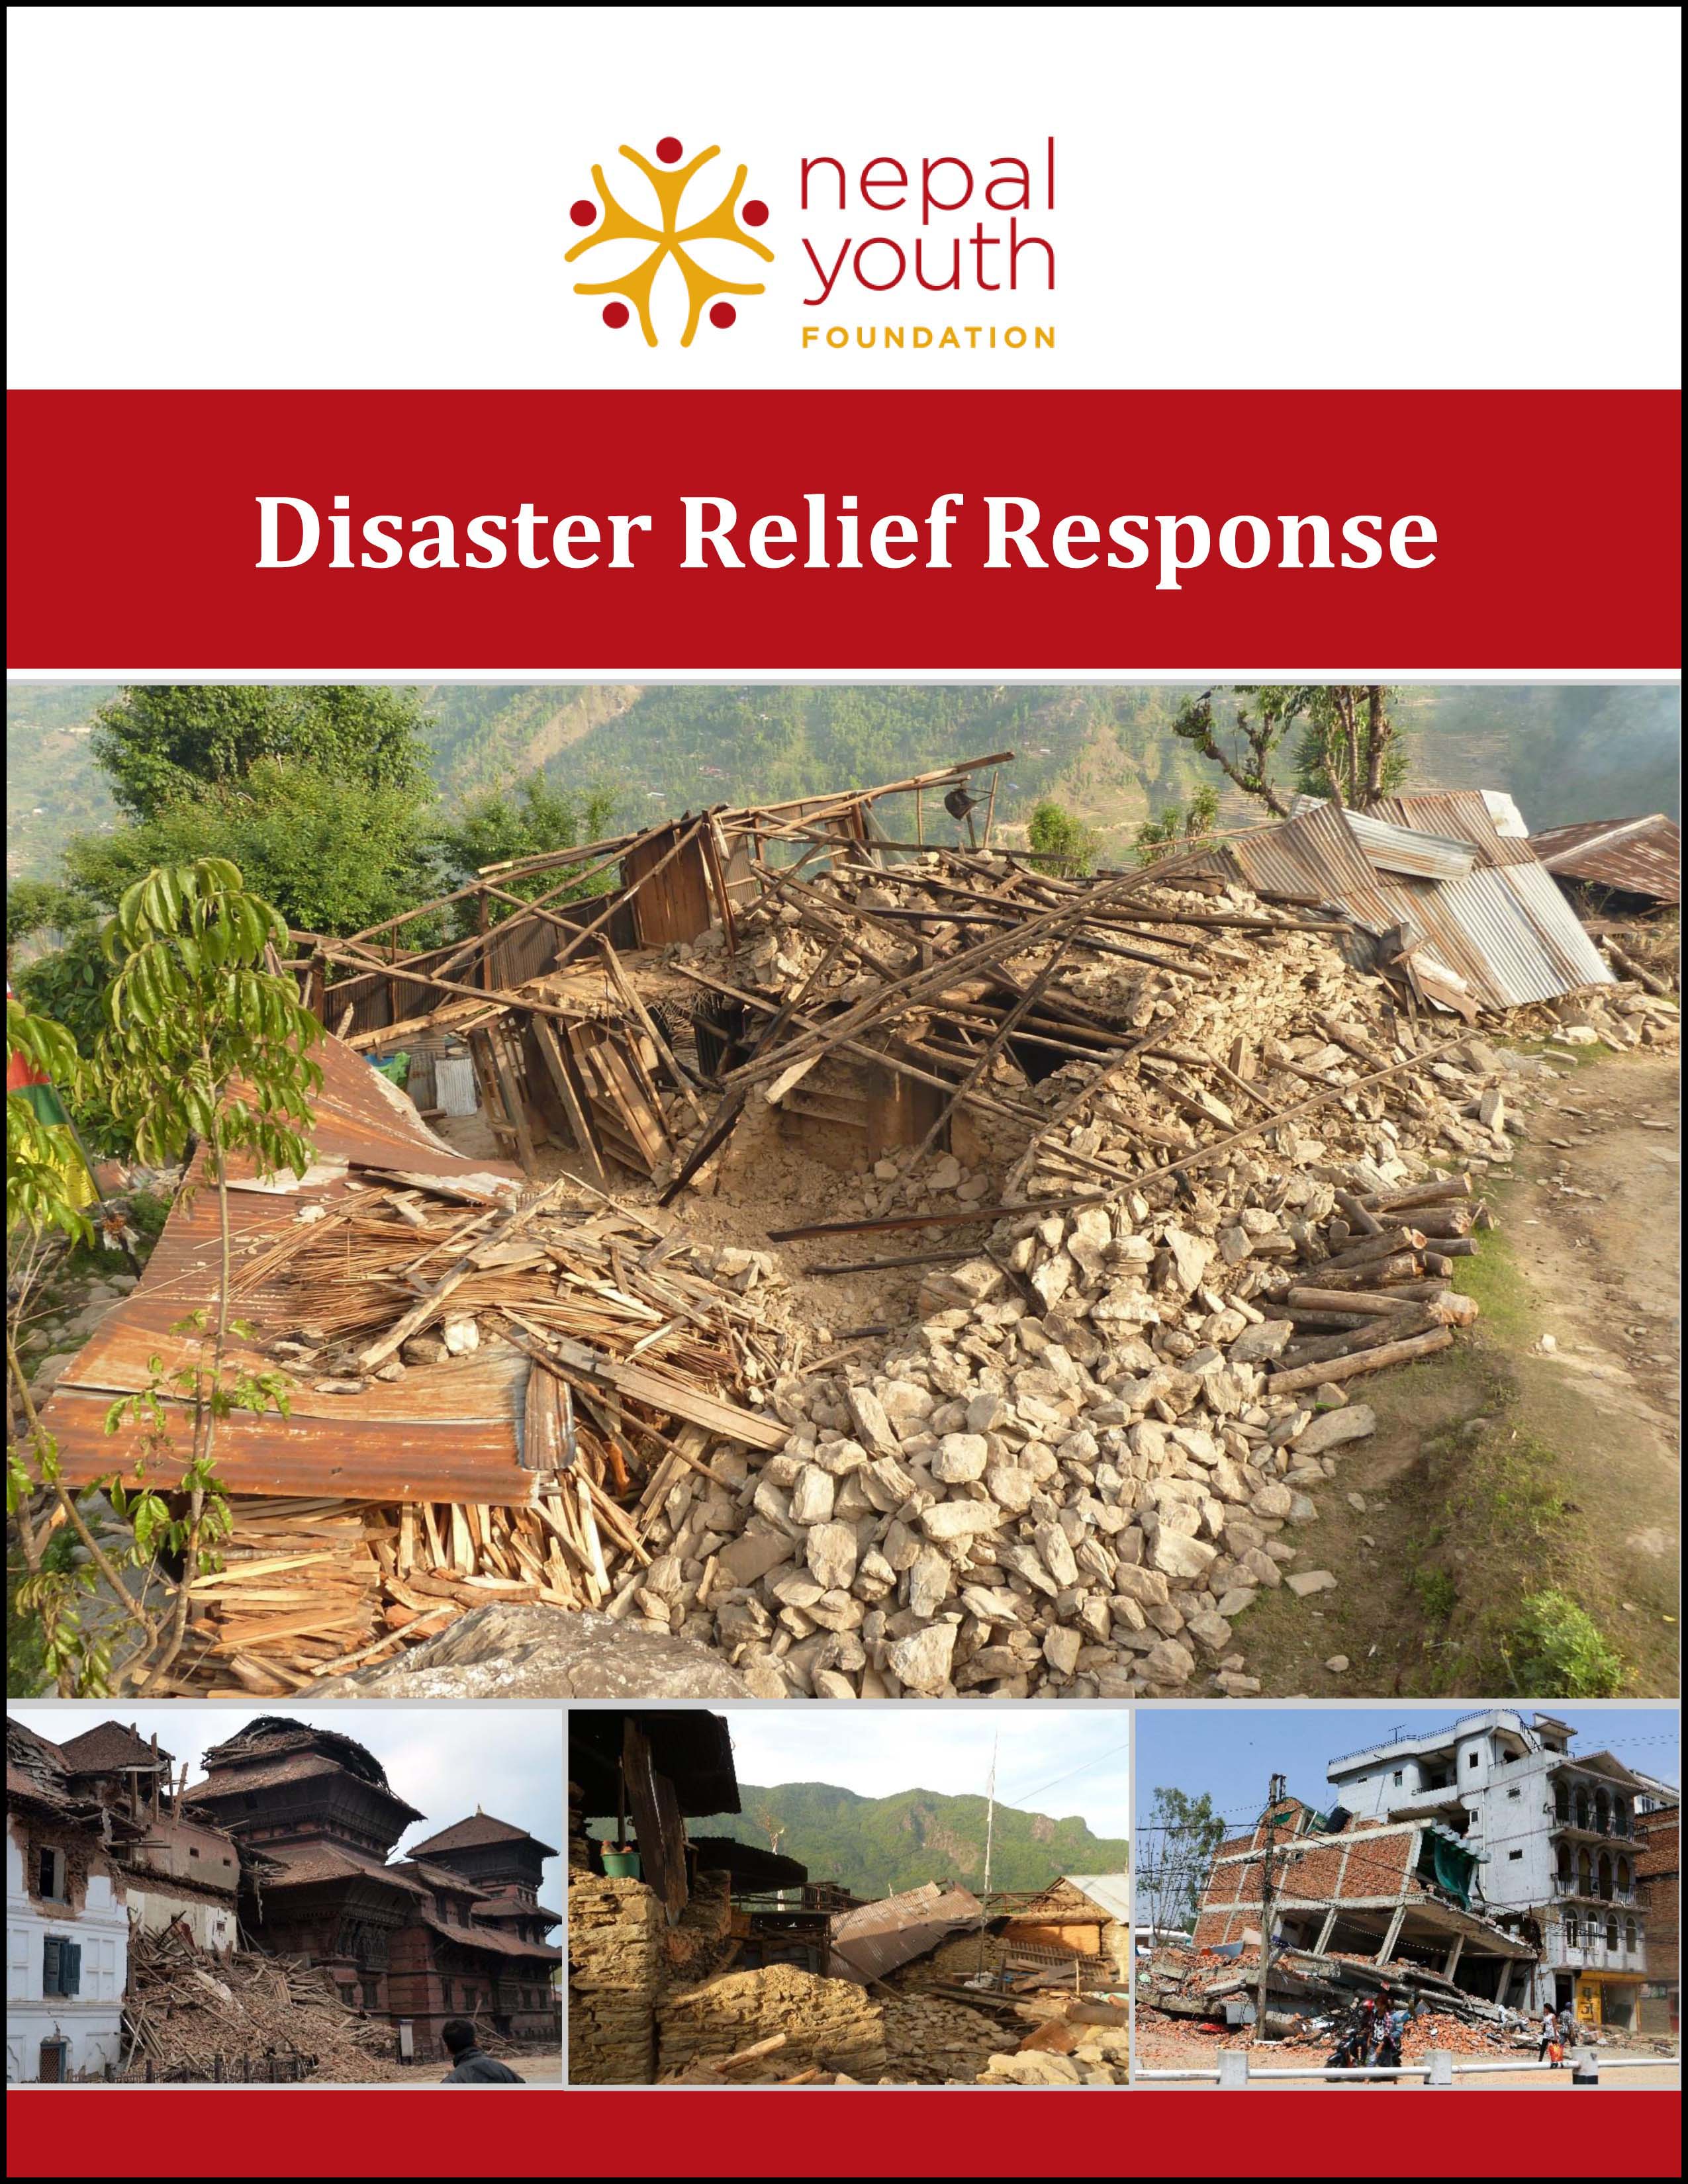 NYF Disaster Relief Response update as of June 1, 2015